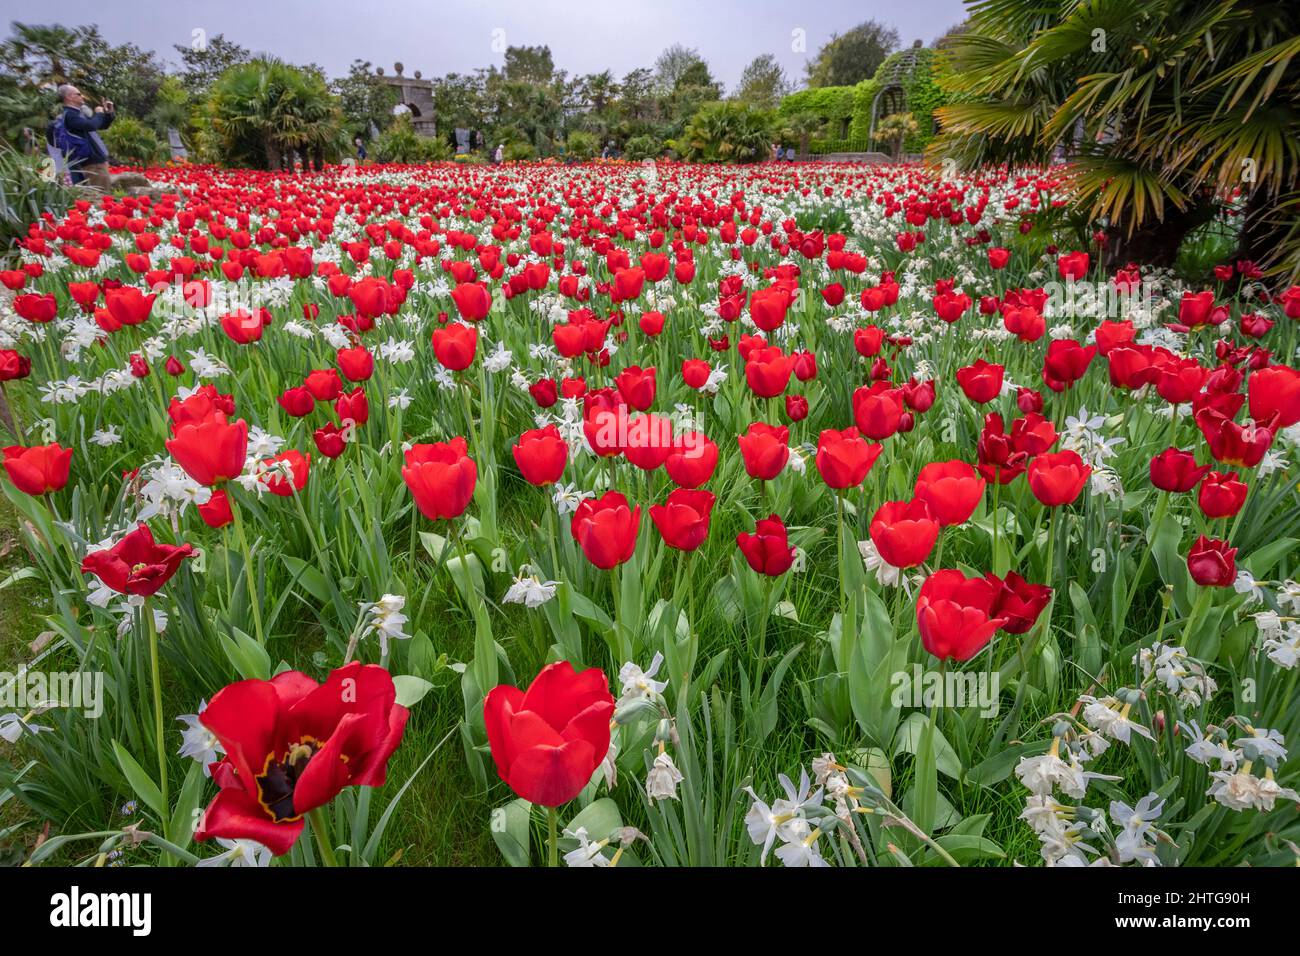 Arundel Castle Tulip Festival showing a magnificent display of red tulips in april - Arundel, West Sussex, England Stock Photo